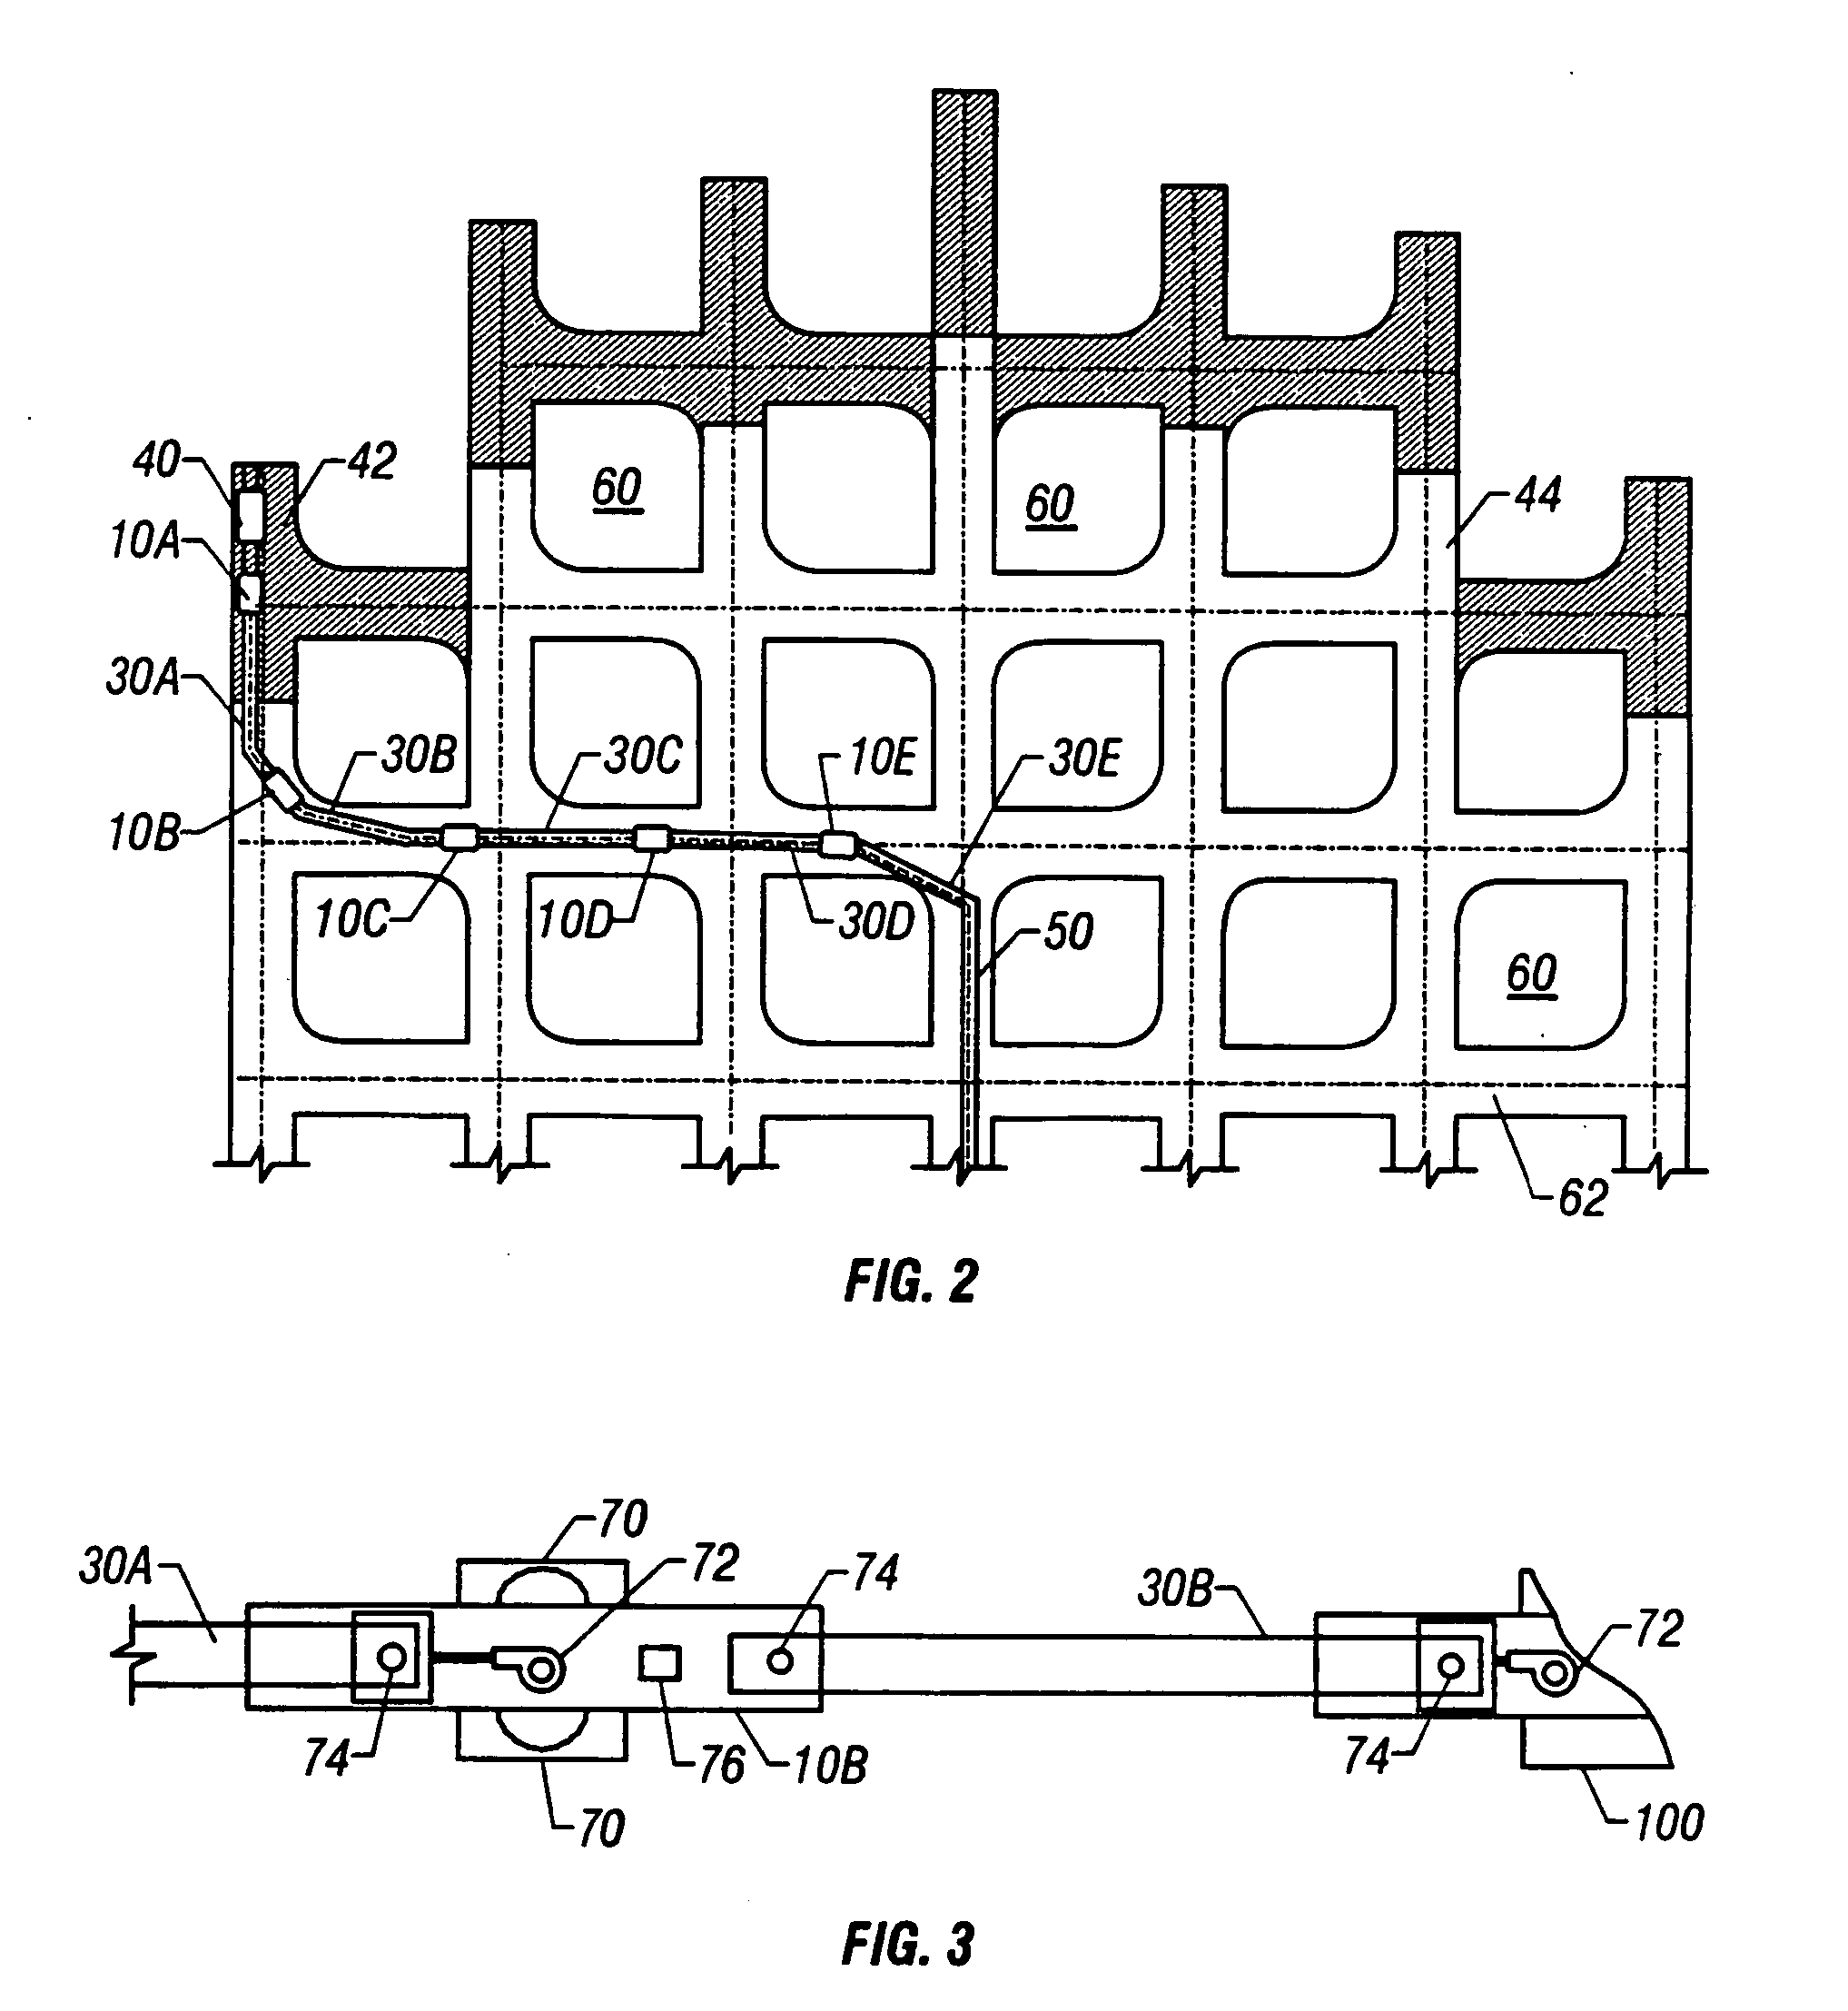 Automated continuous haulage system